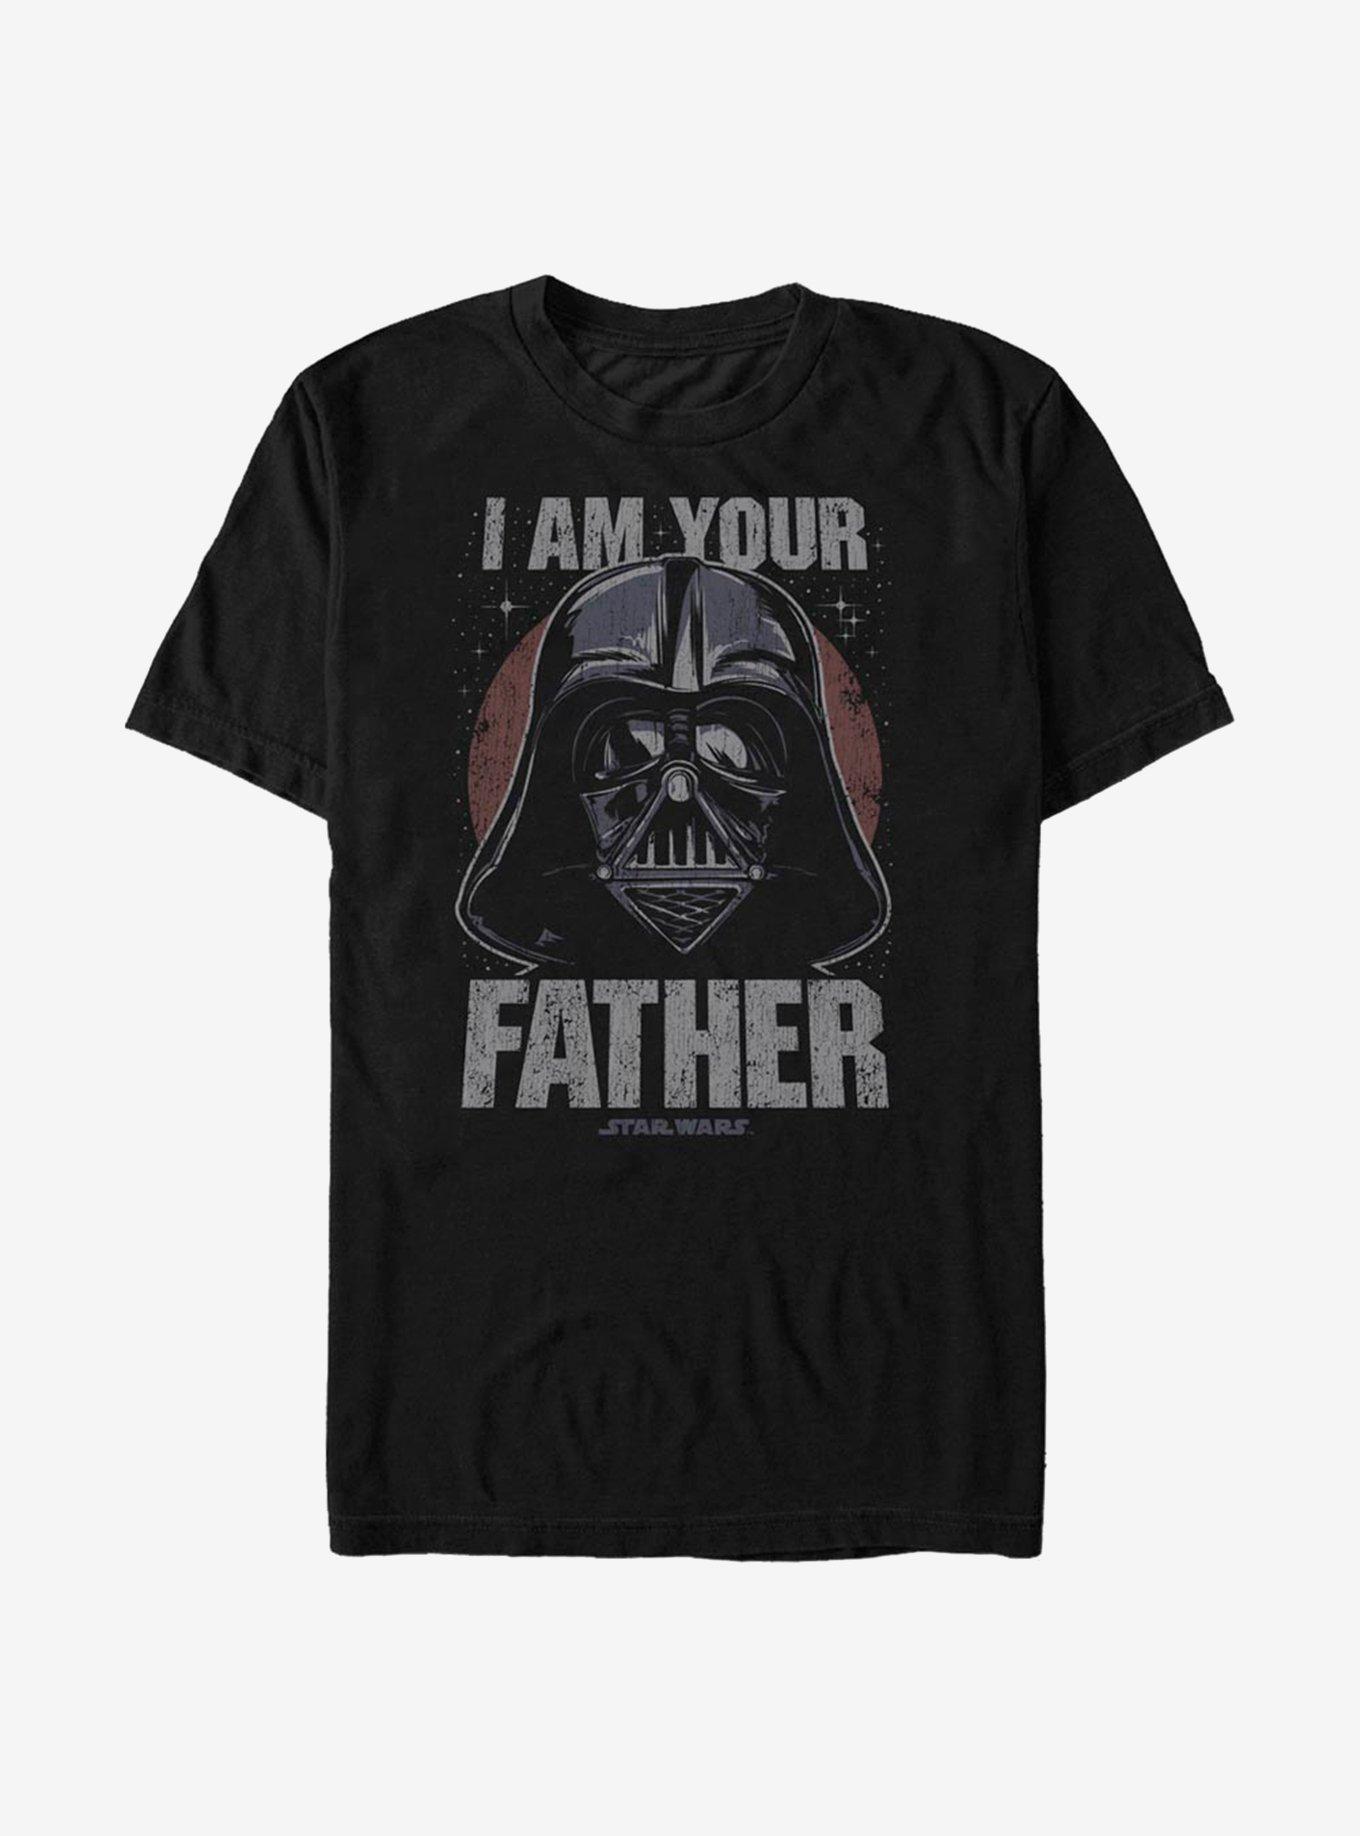 Star Wars Founding Father T-Shirt